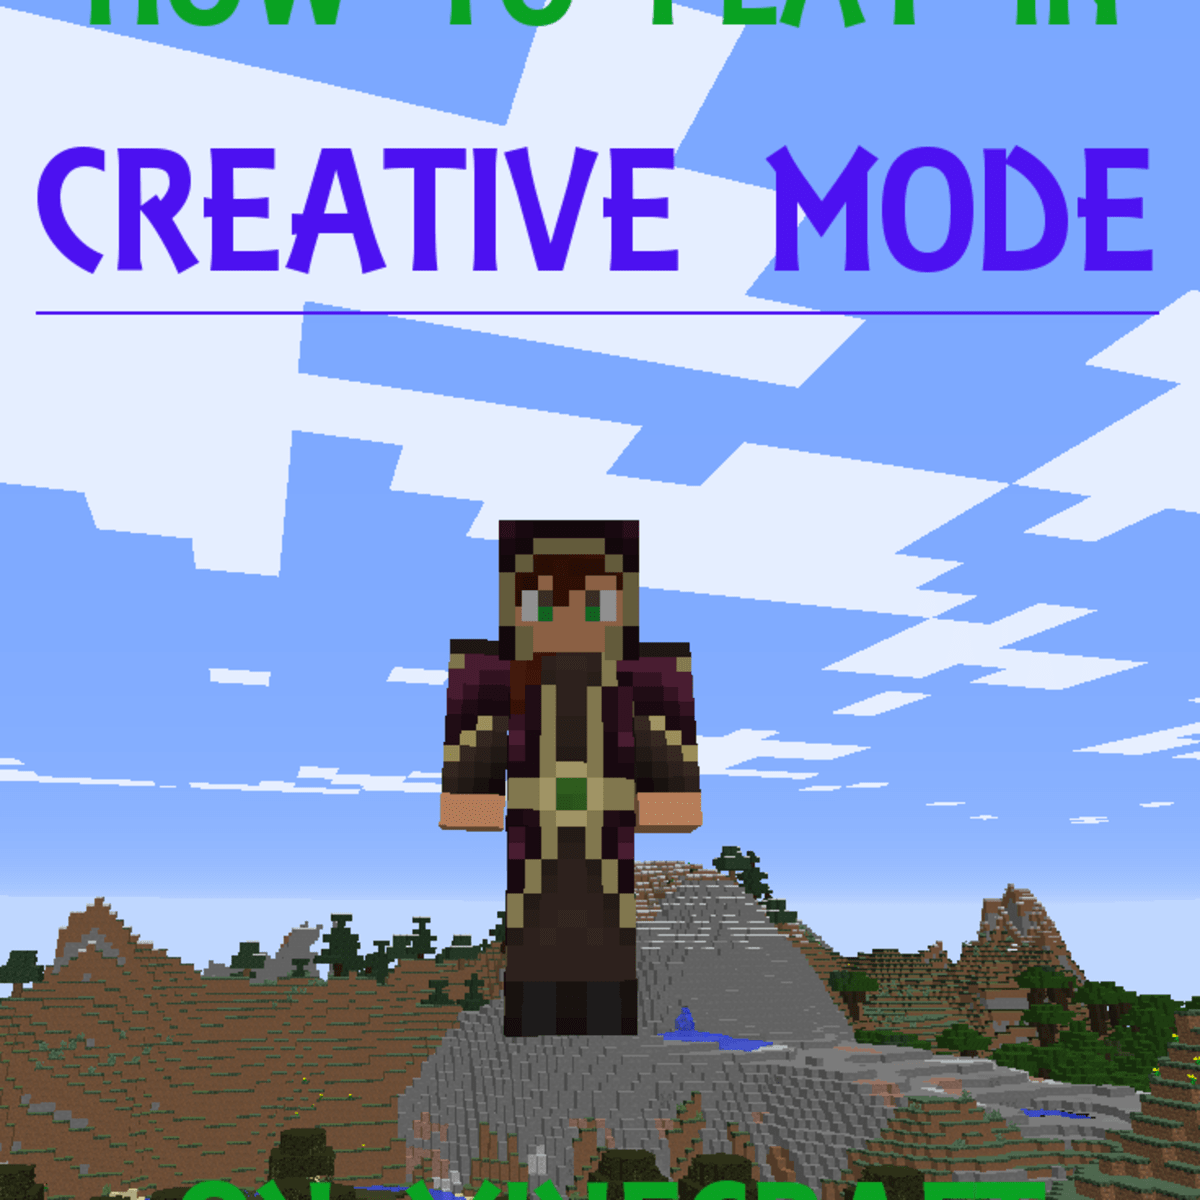 How To Play In Creative Mode On Minecraft Levelskip Video Games